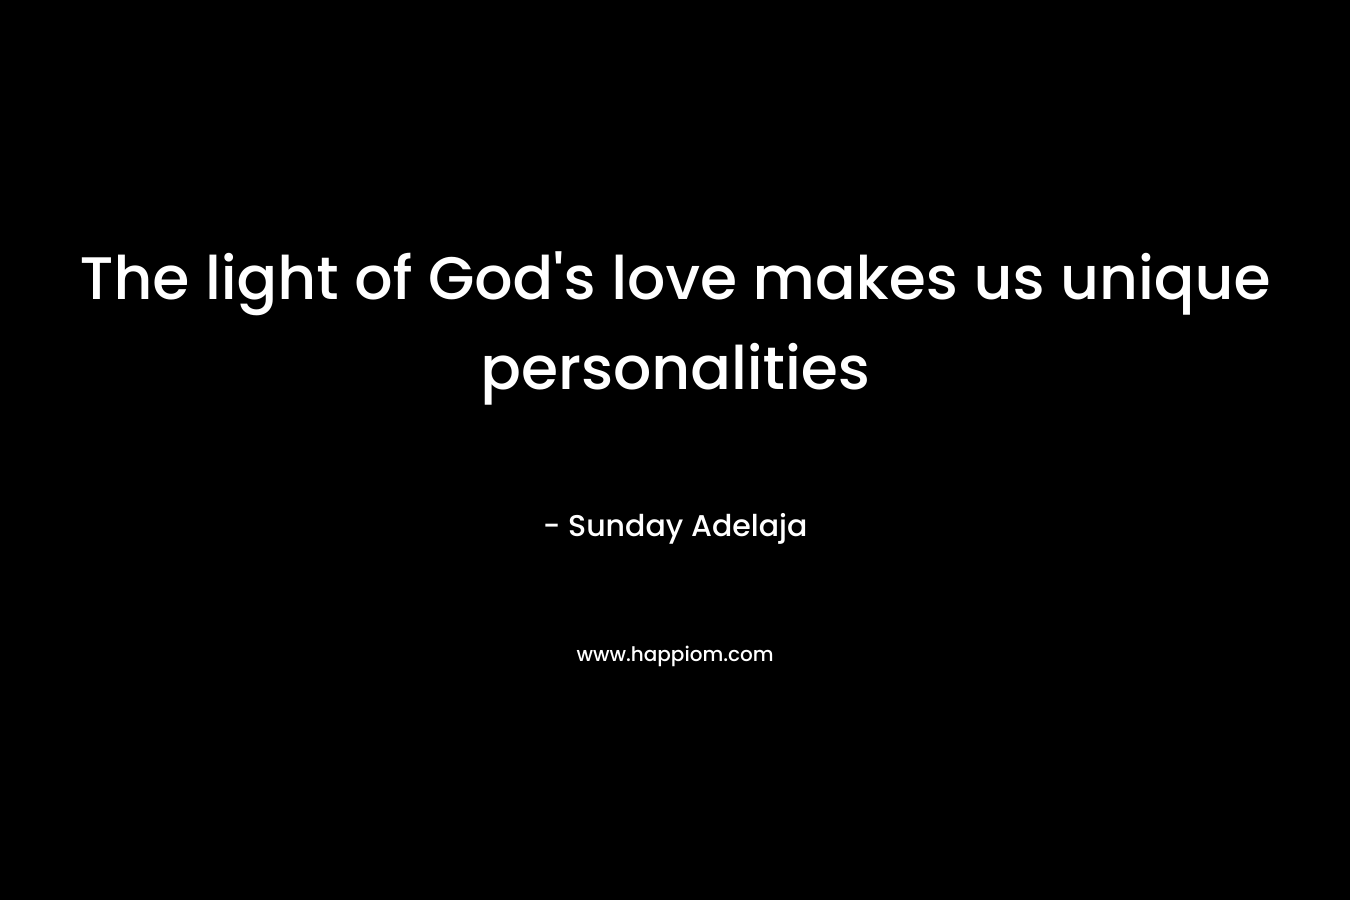 The light of God's love makes us unique personalities